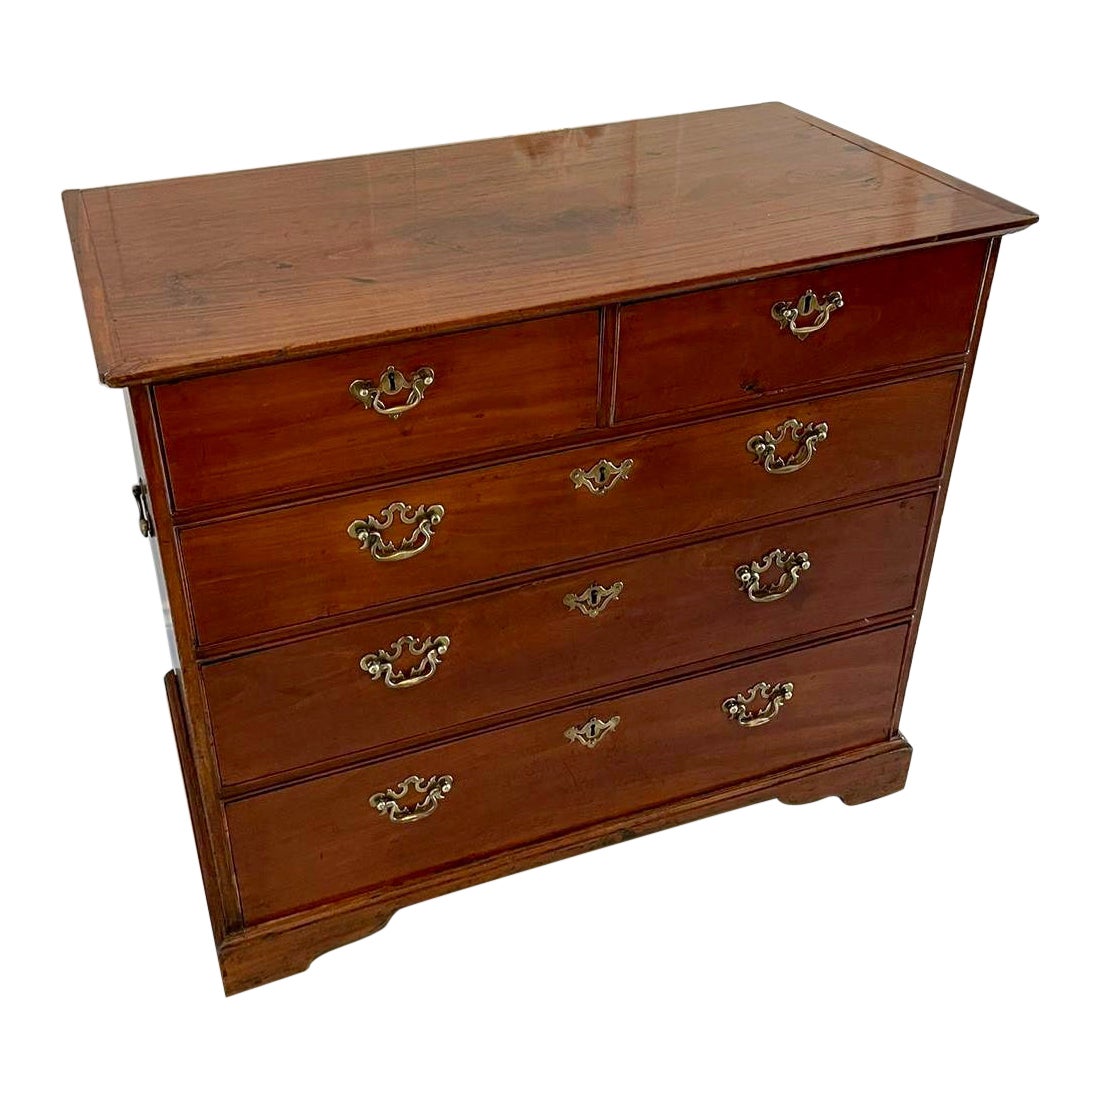 Rare Antique 18th Century George III Solid Satinwood Chest of 5 Drawers For Sale